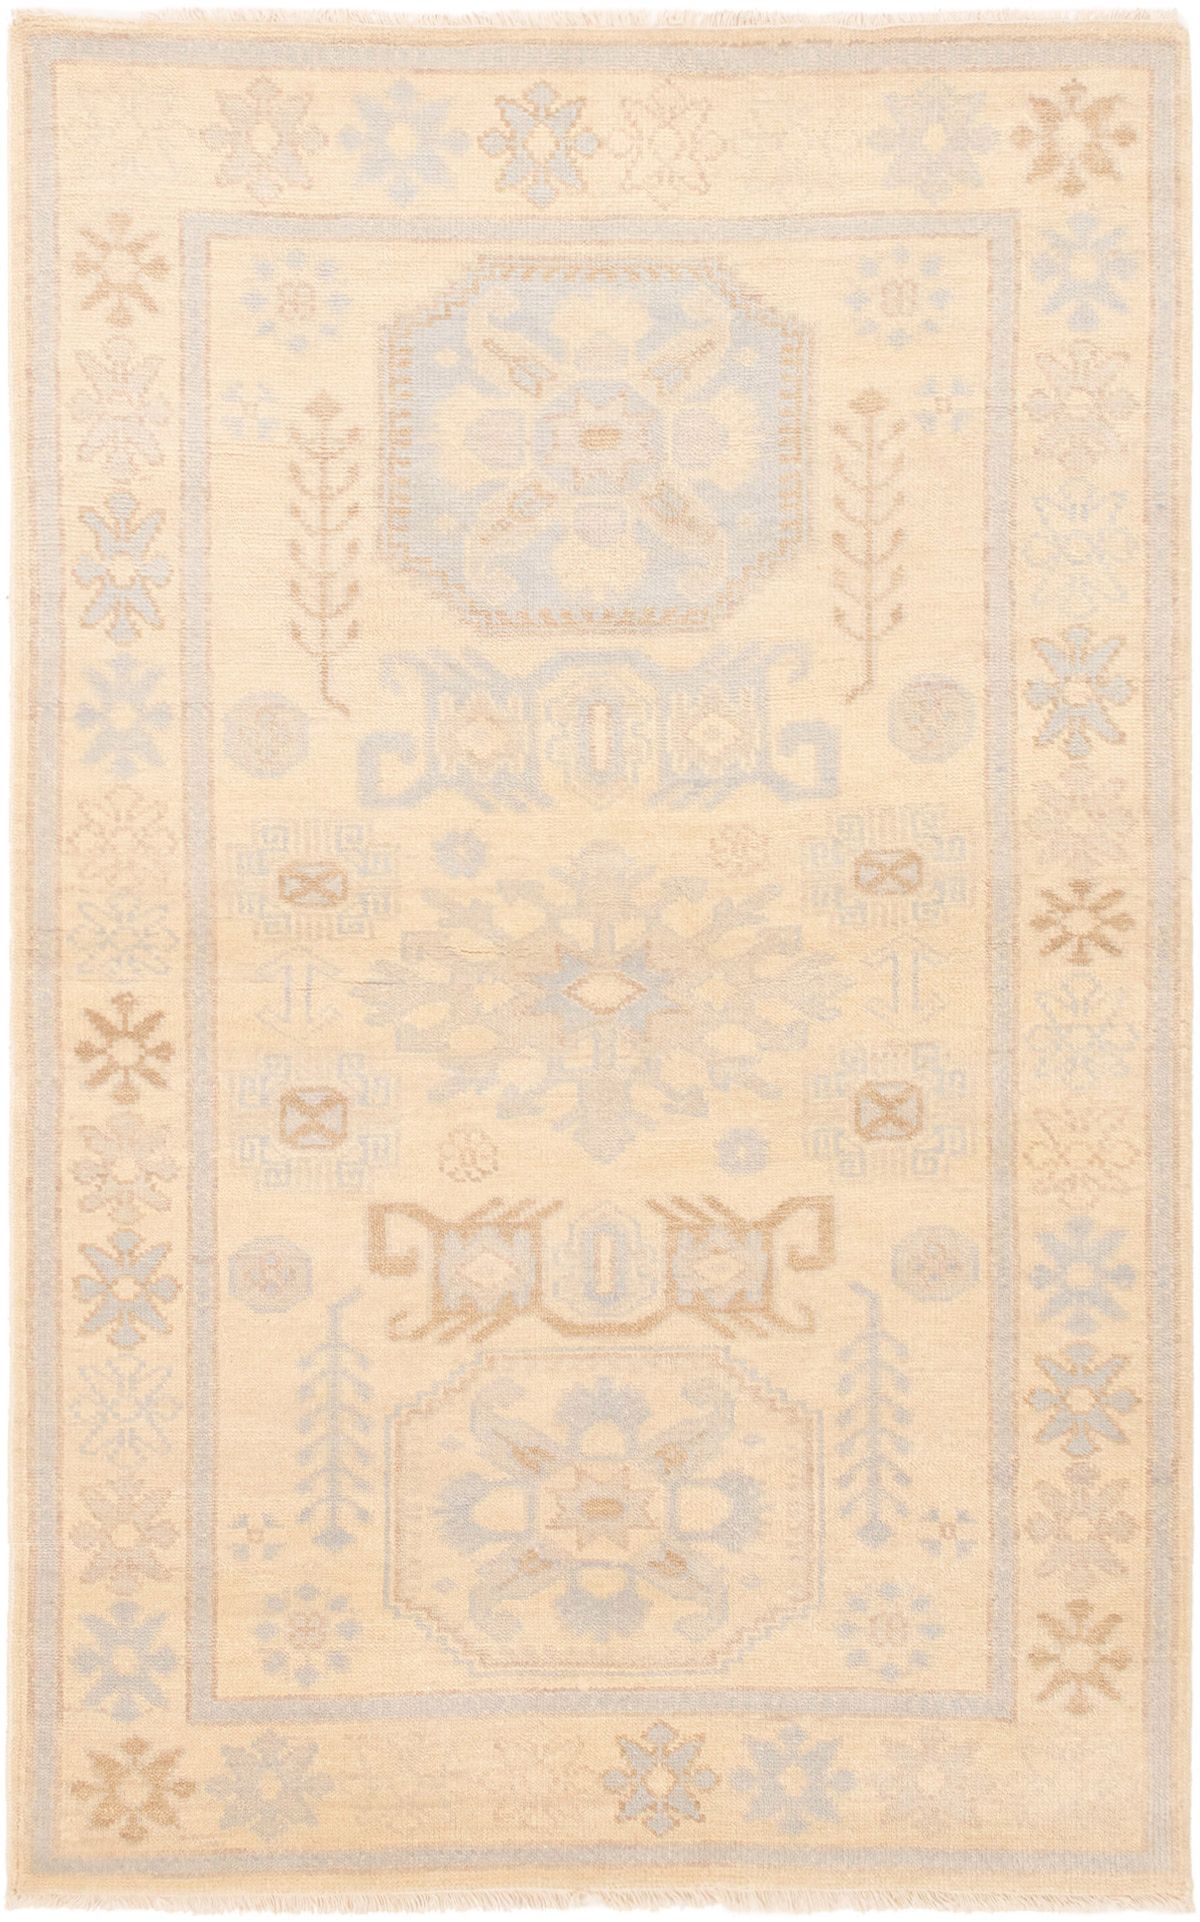 Hand-knotted Finest Ushak Cream Wool Rug 5'1" x 7'11"  Size: 5'1" x 7'11"  